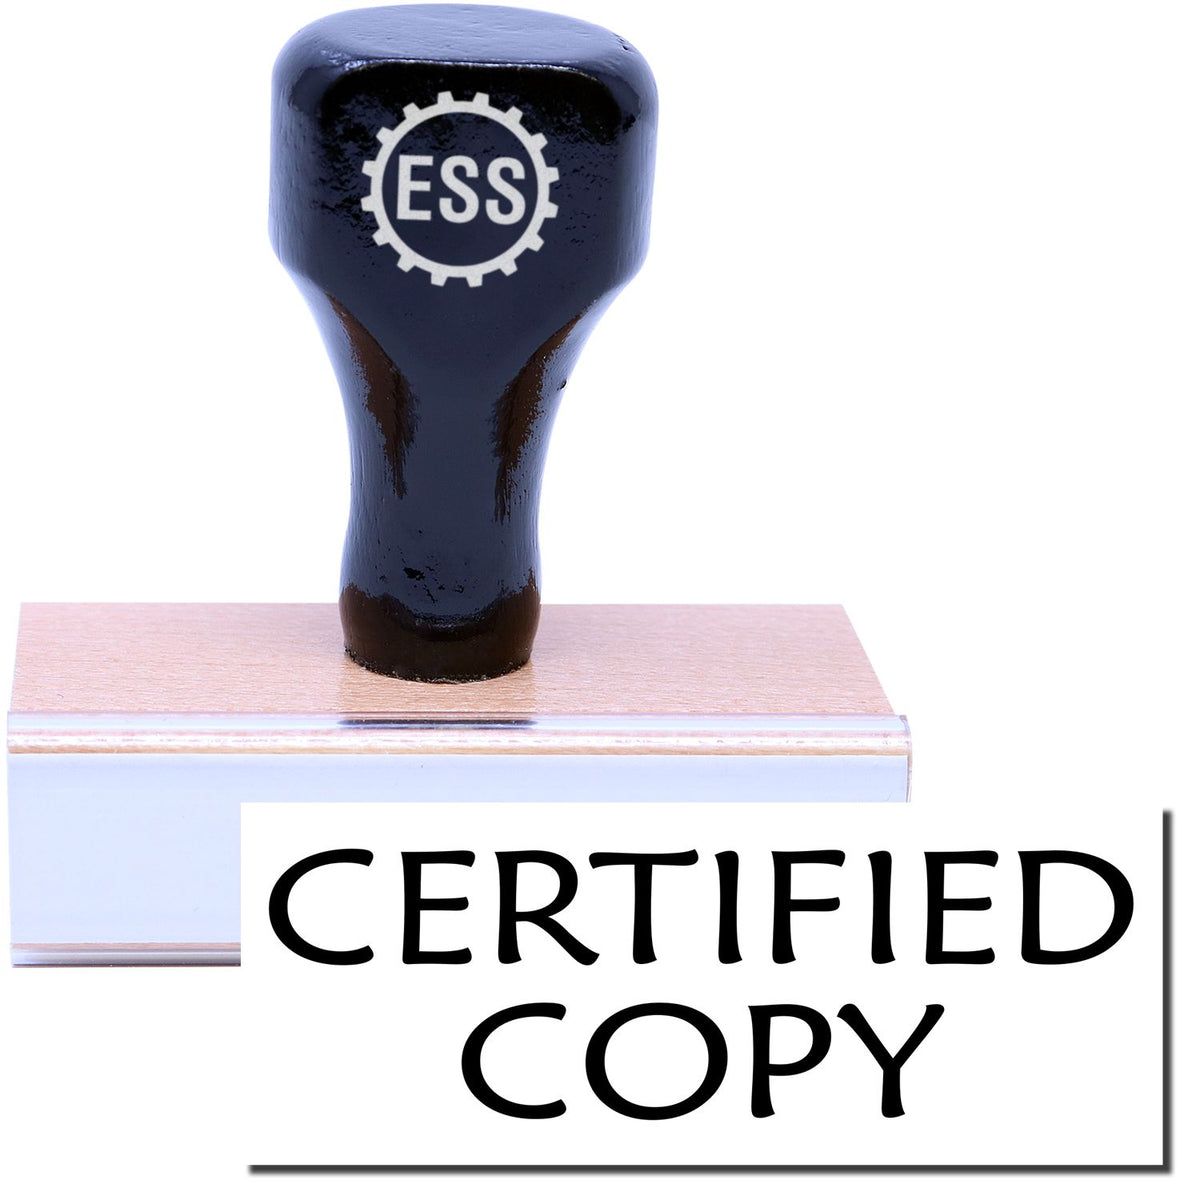 A stock office rubber stamp with a stamped image showing how the text &quot;CERTIFIED COPY&quot; is displayed after stamping.